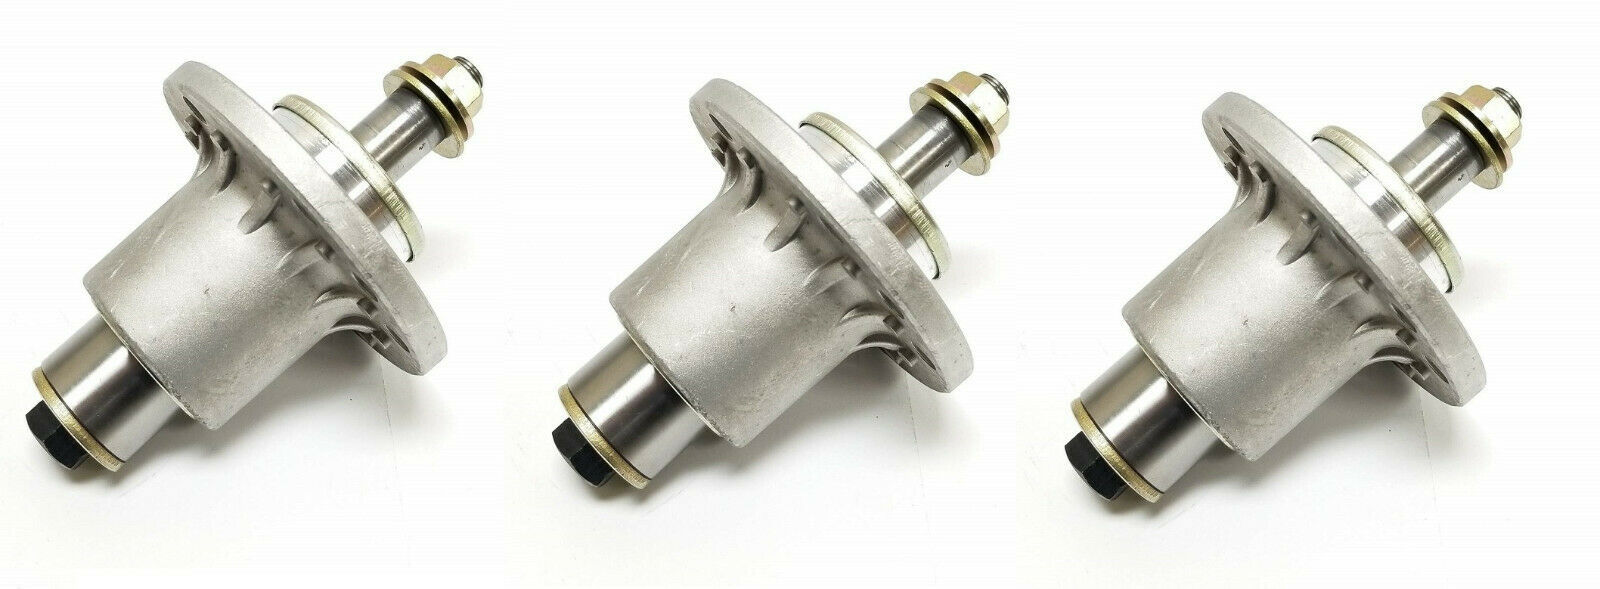 2 Spindle Assemblies Compatible With Part Numbers 103-1105, 103-1183, 103-1184 - $90.08